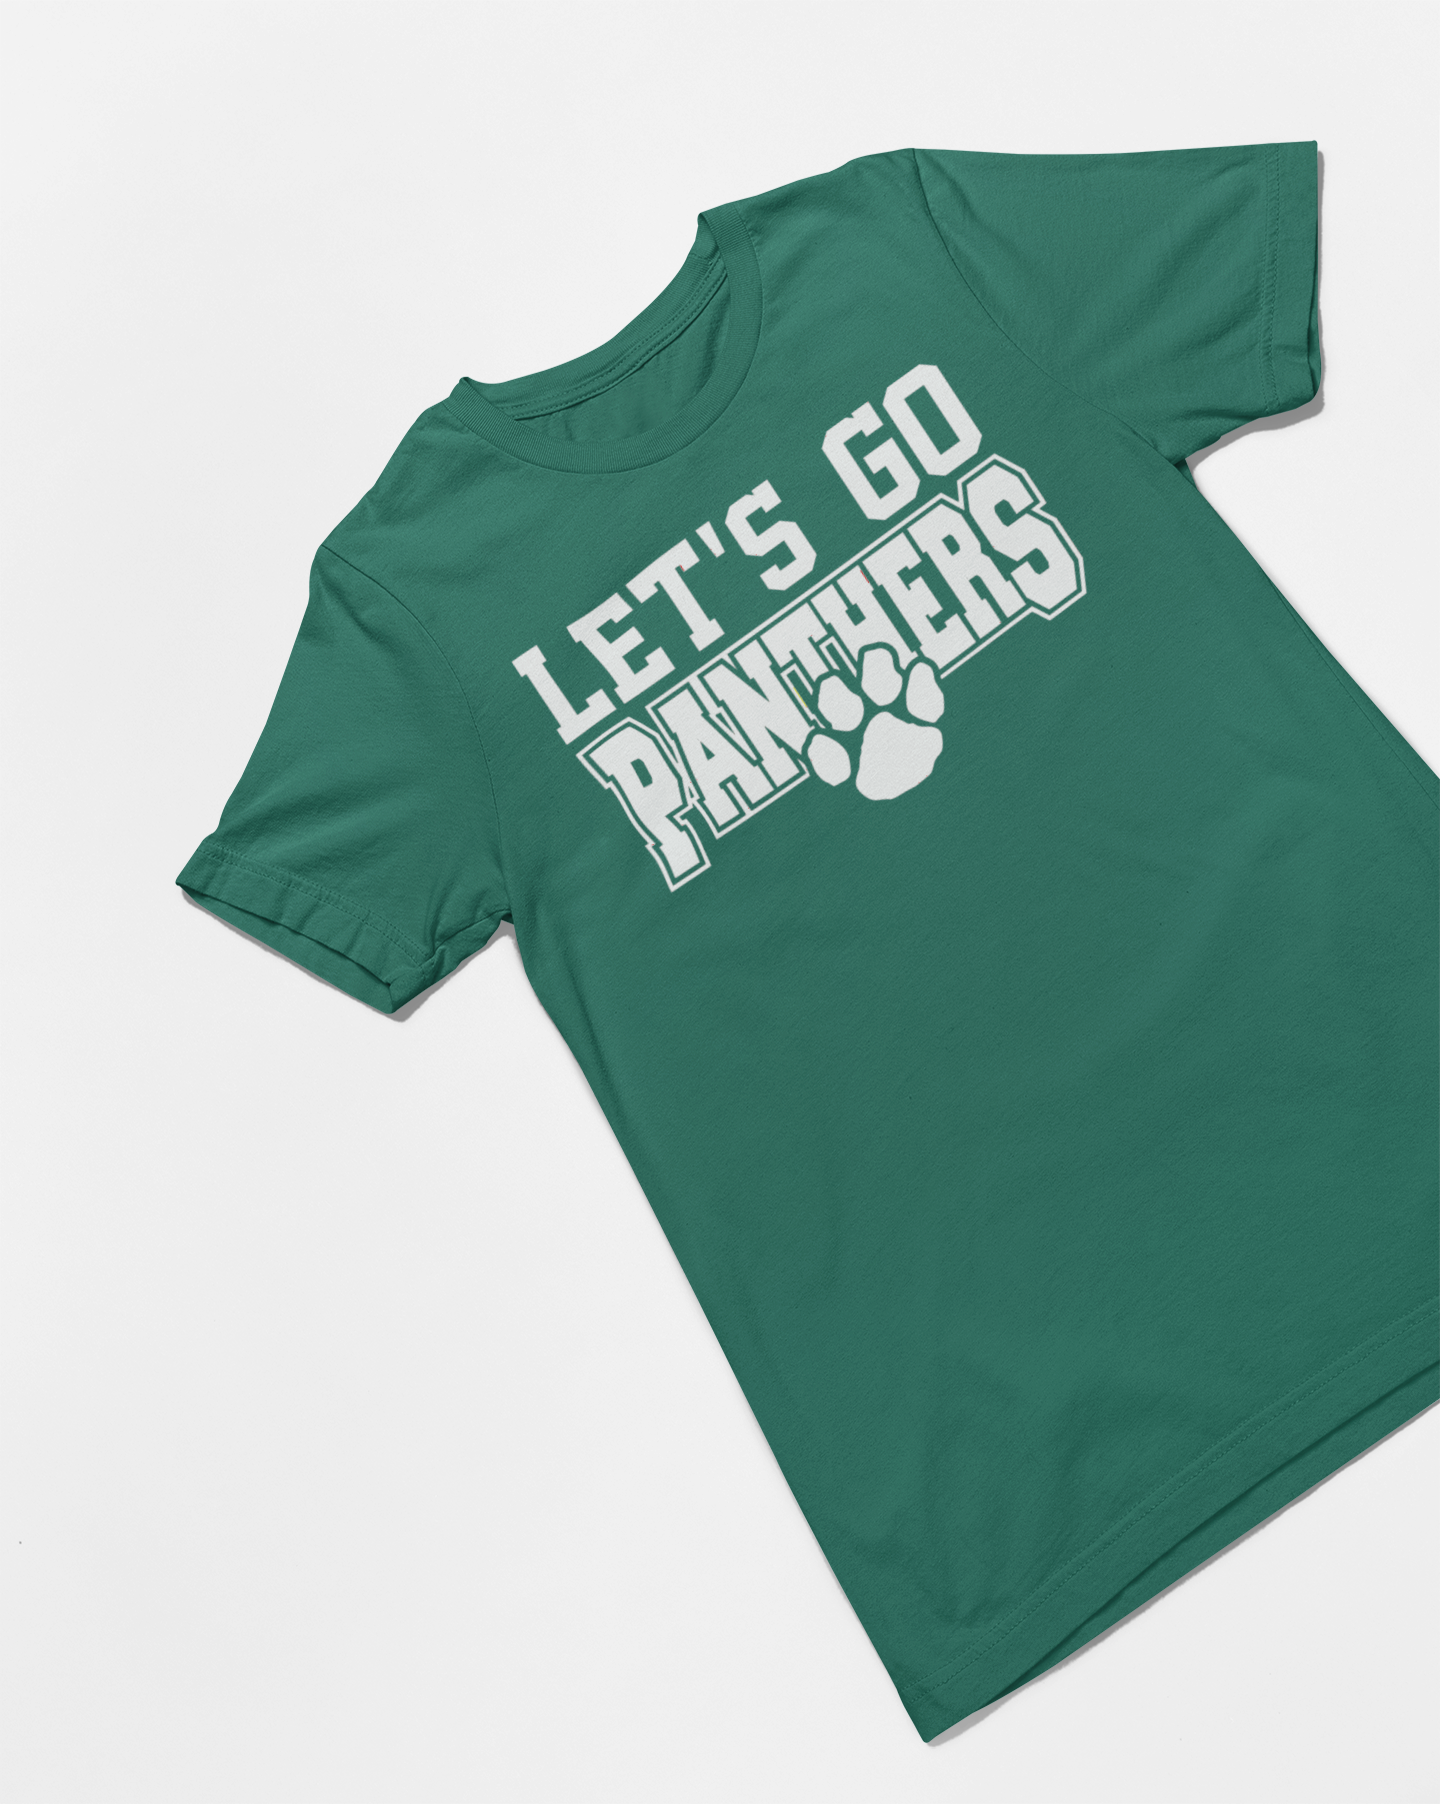 Let's Go (Your Team Here) T-shirt